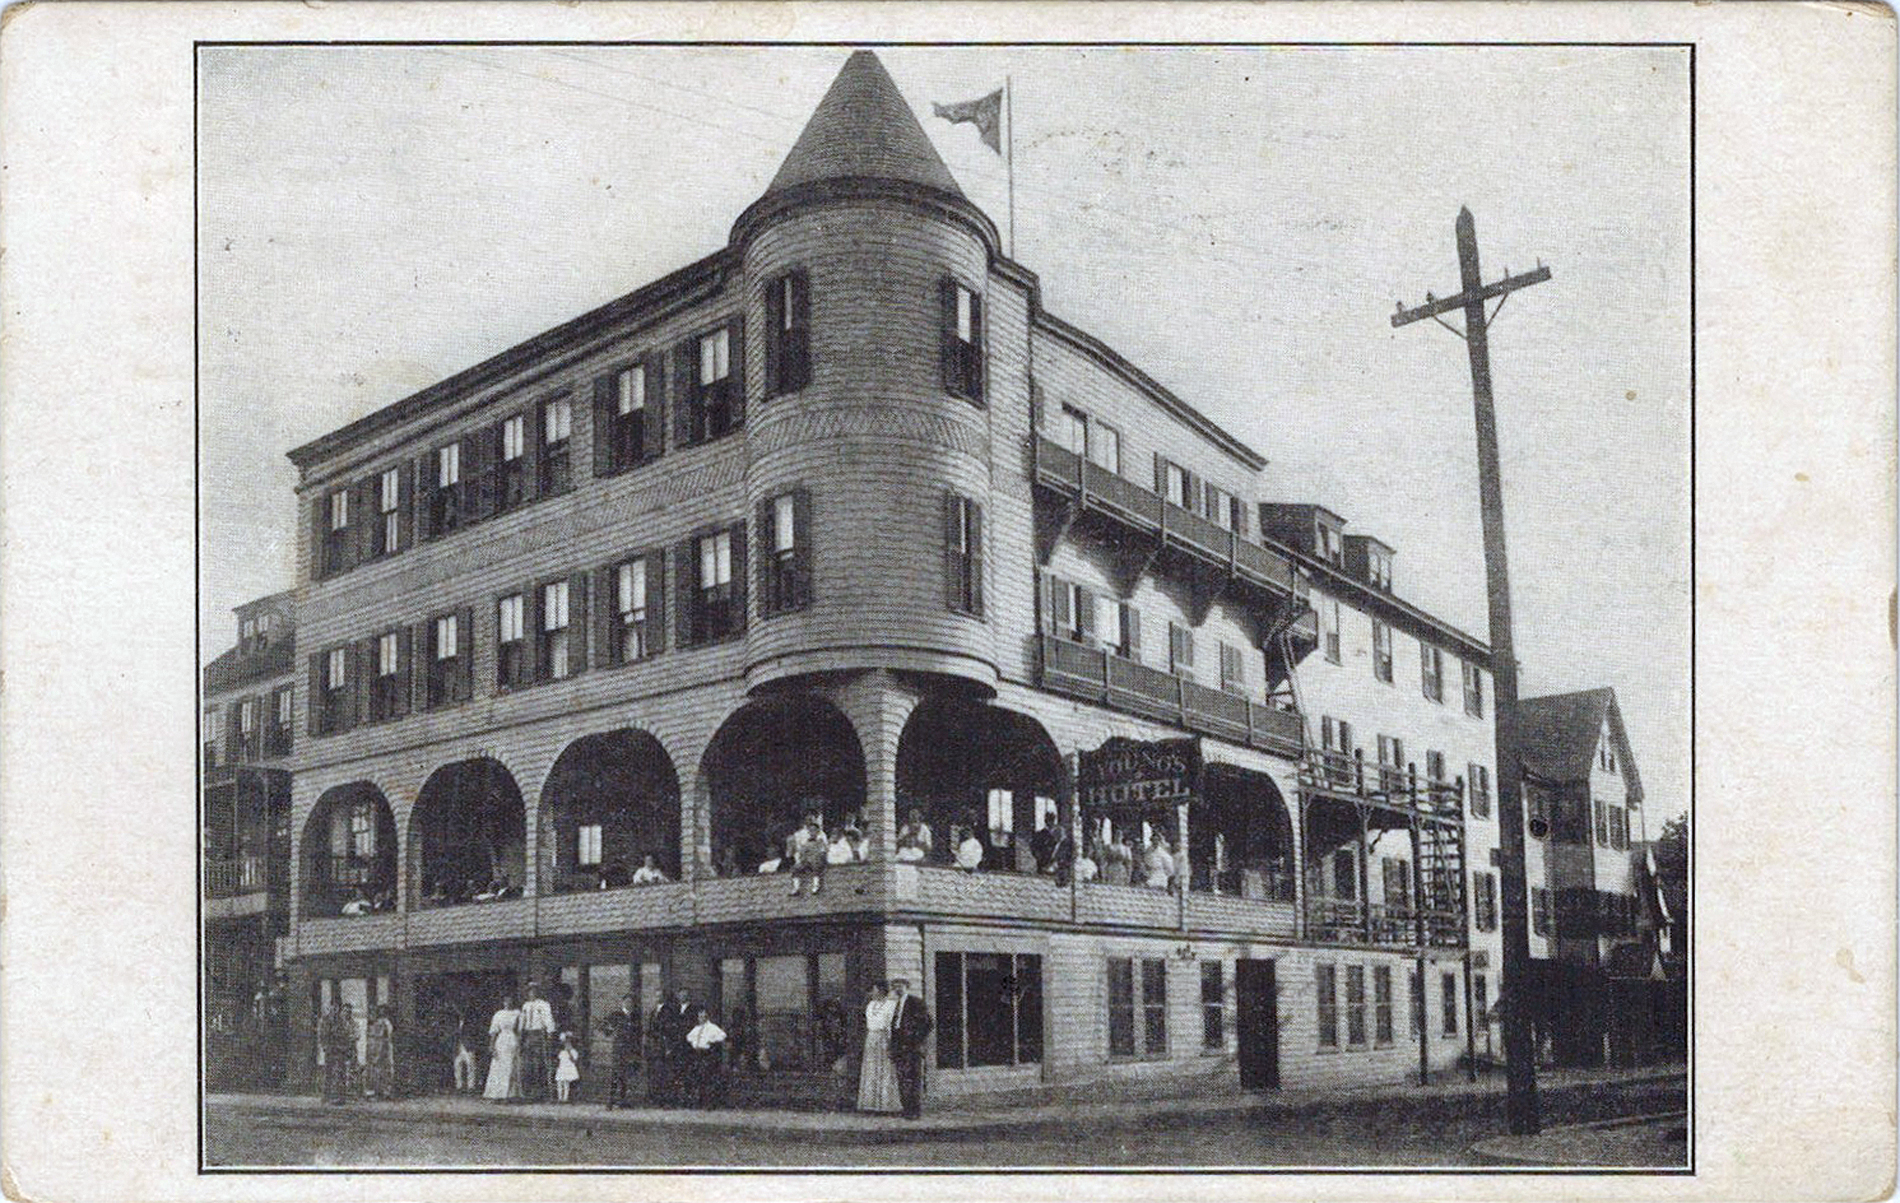 Atlantic City - Youngs Hotel - Card was postmarked 1934 but the style of card and photo look earlier